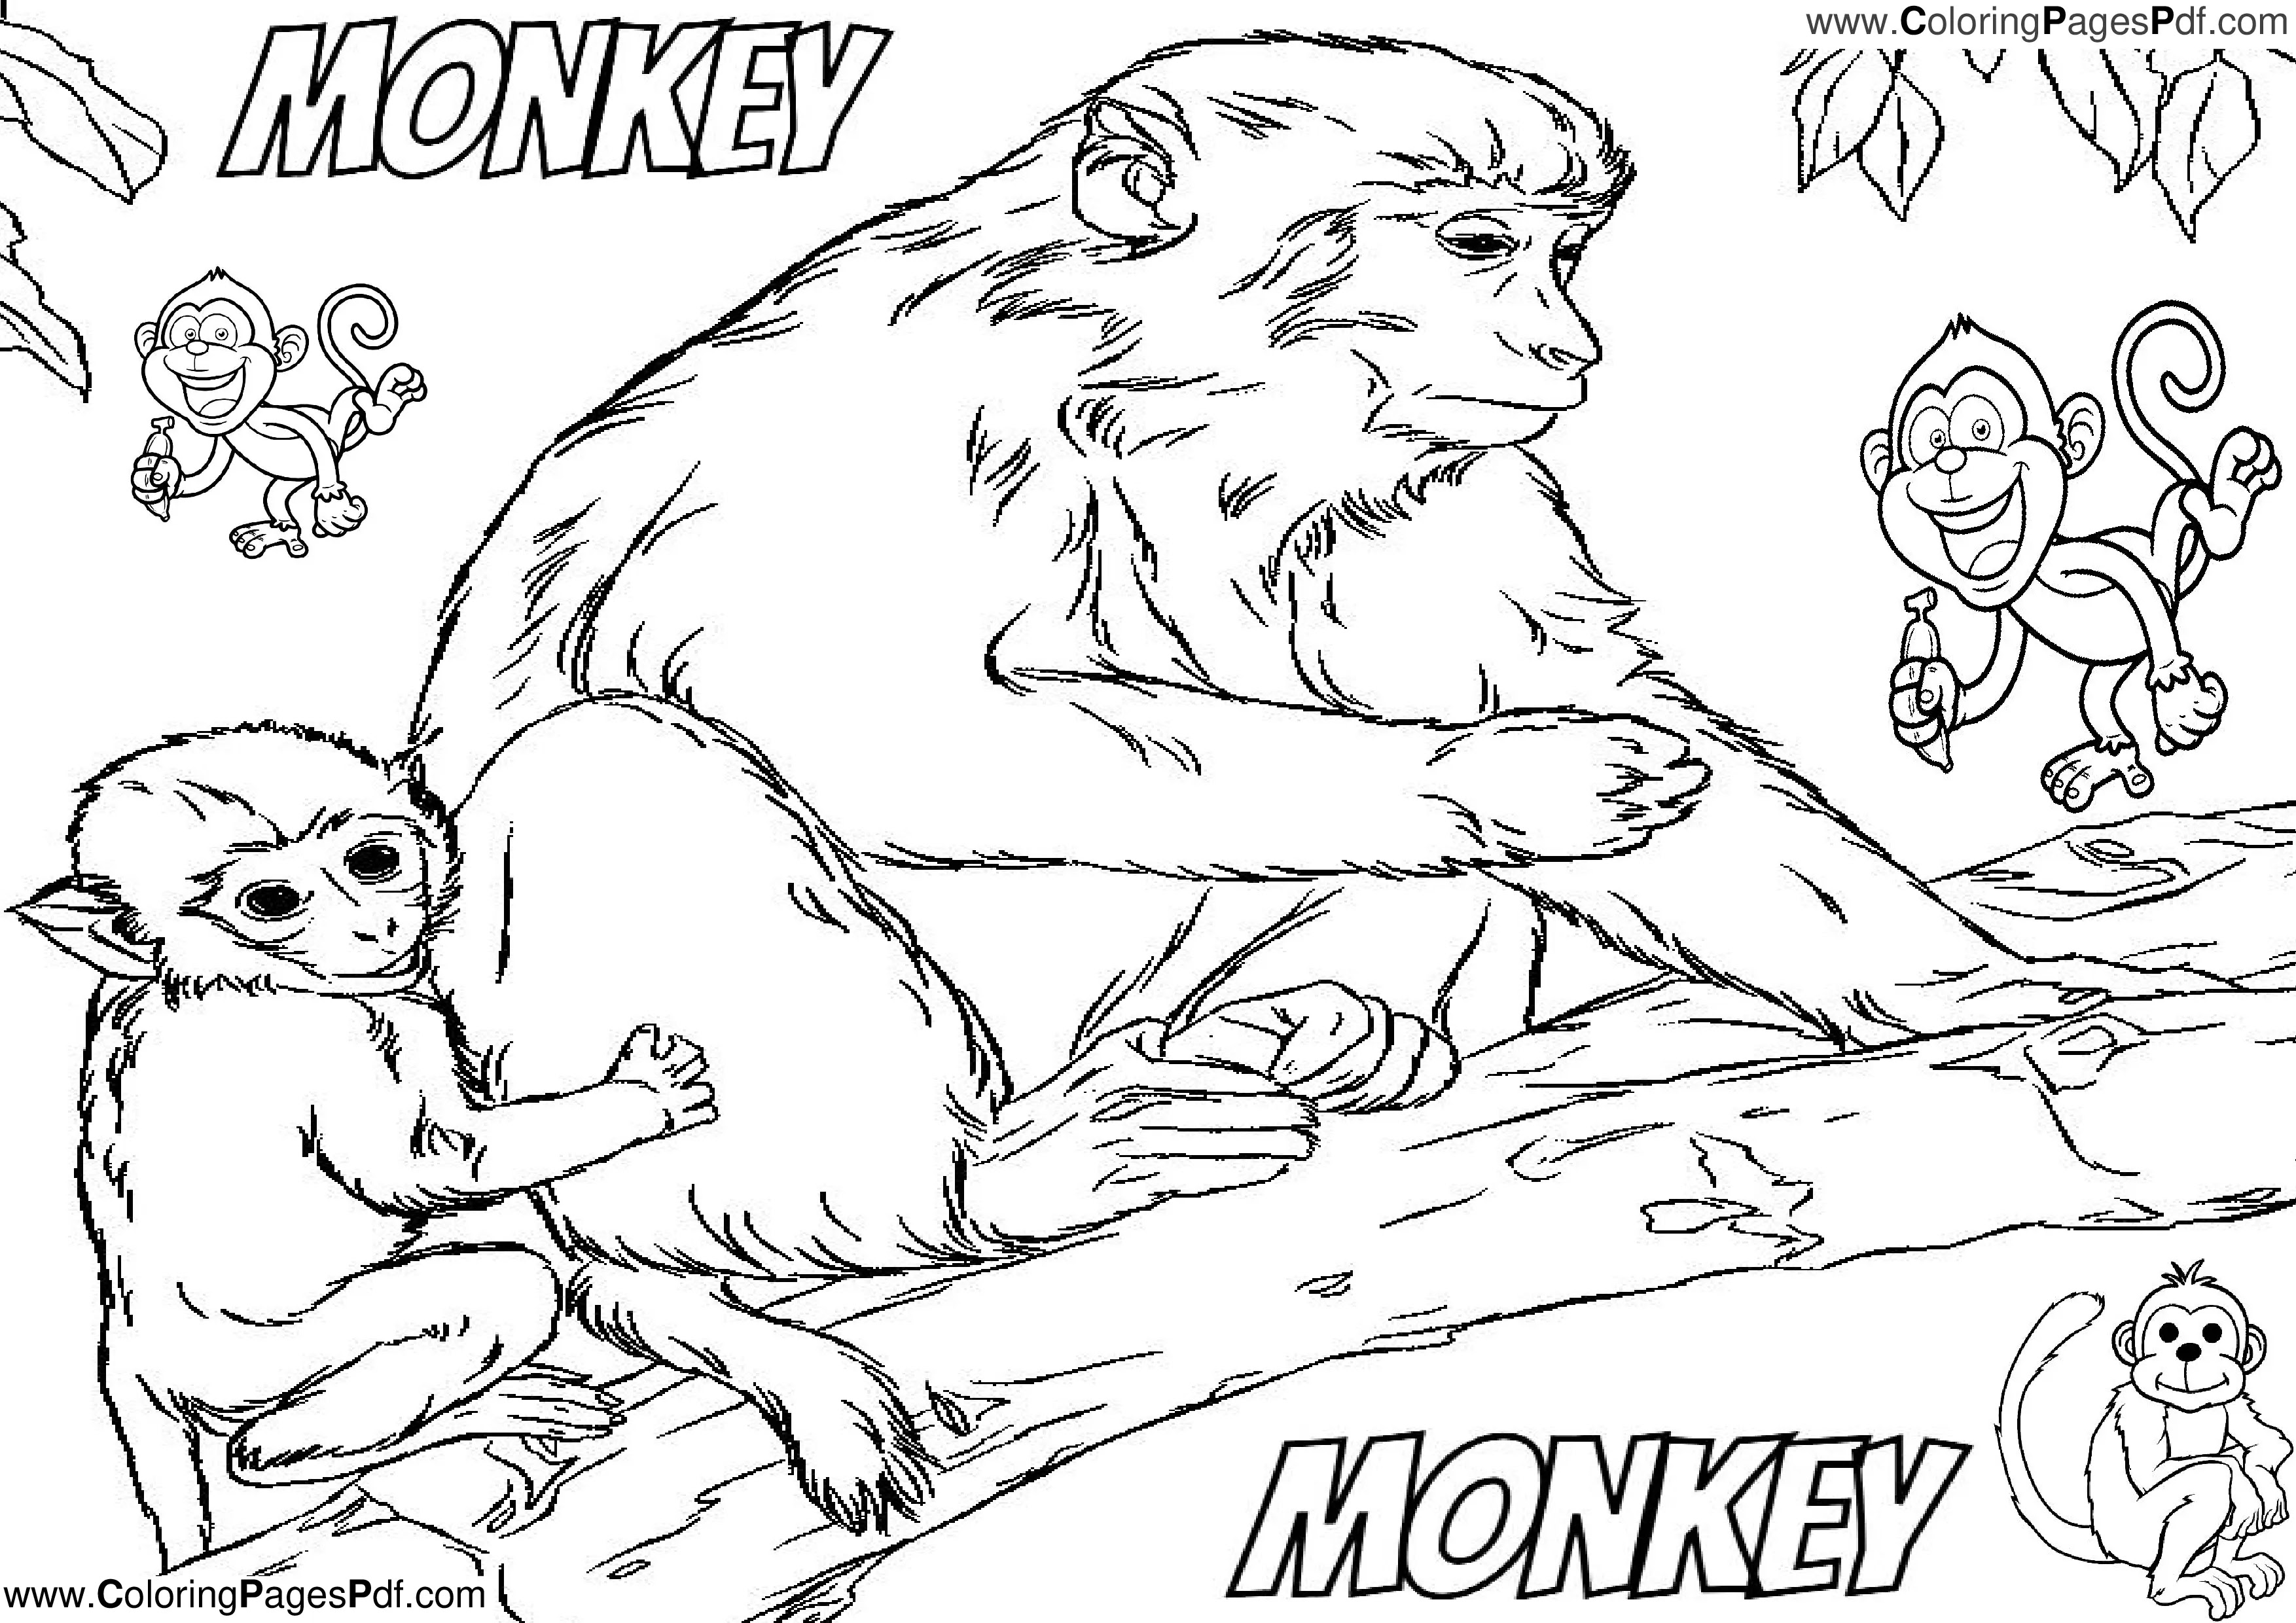 Realistic monkey coloring pages